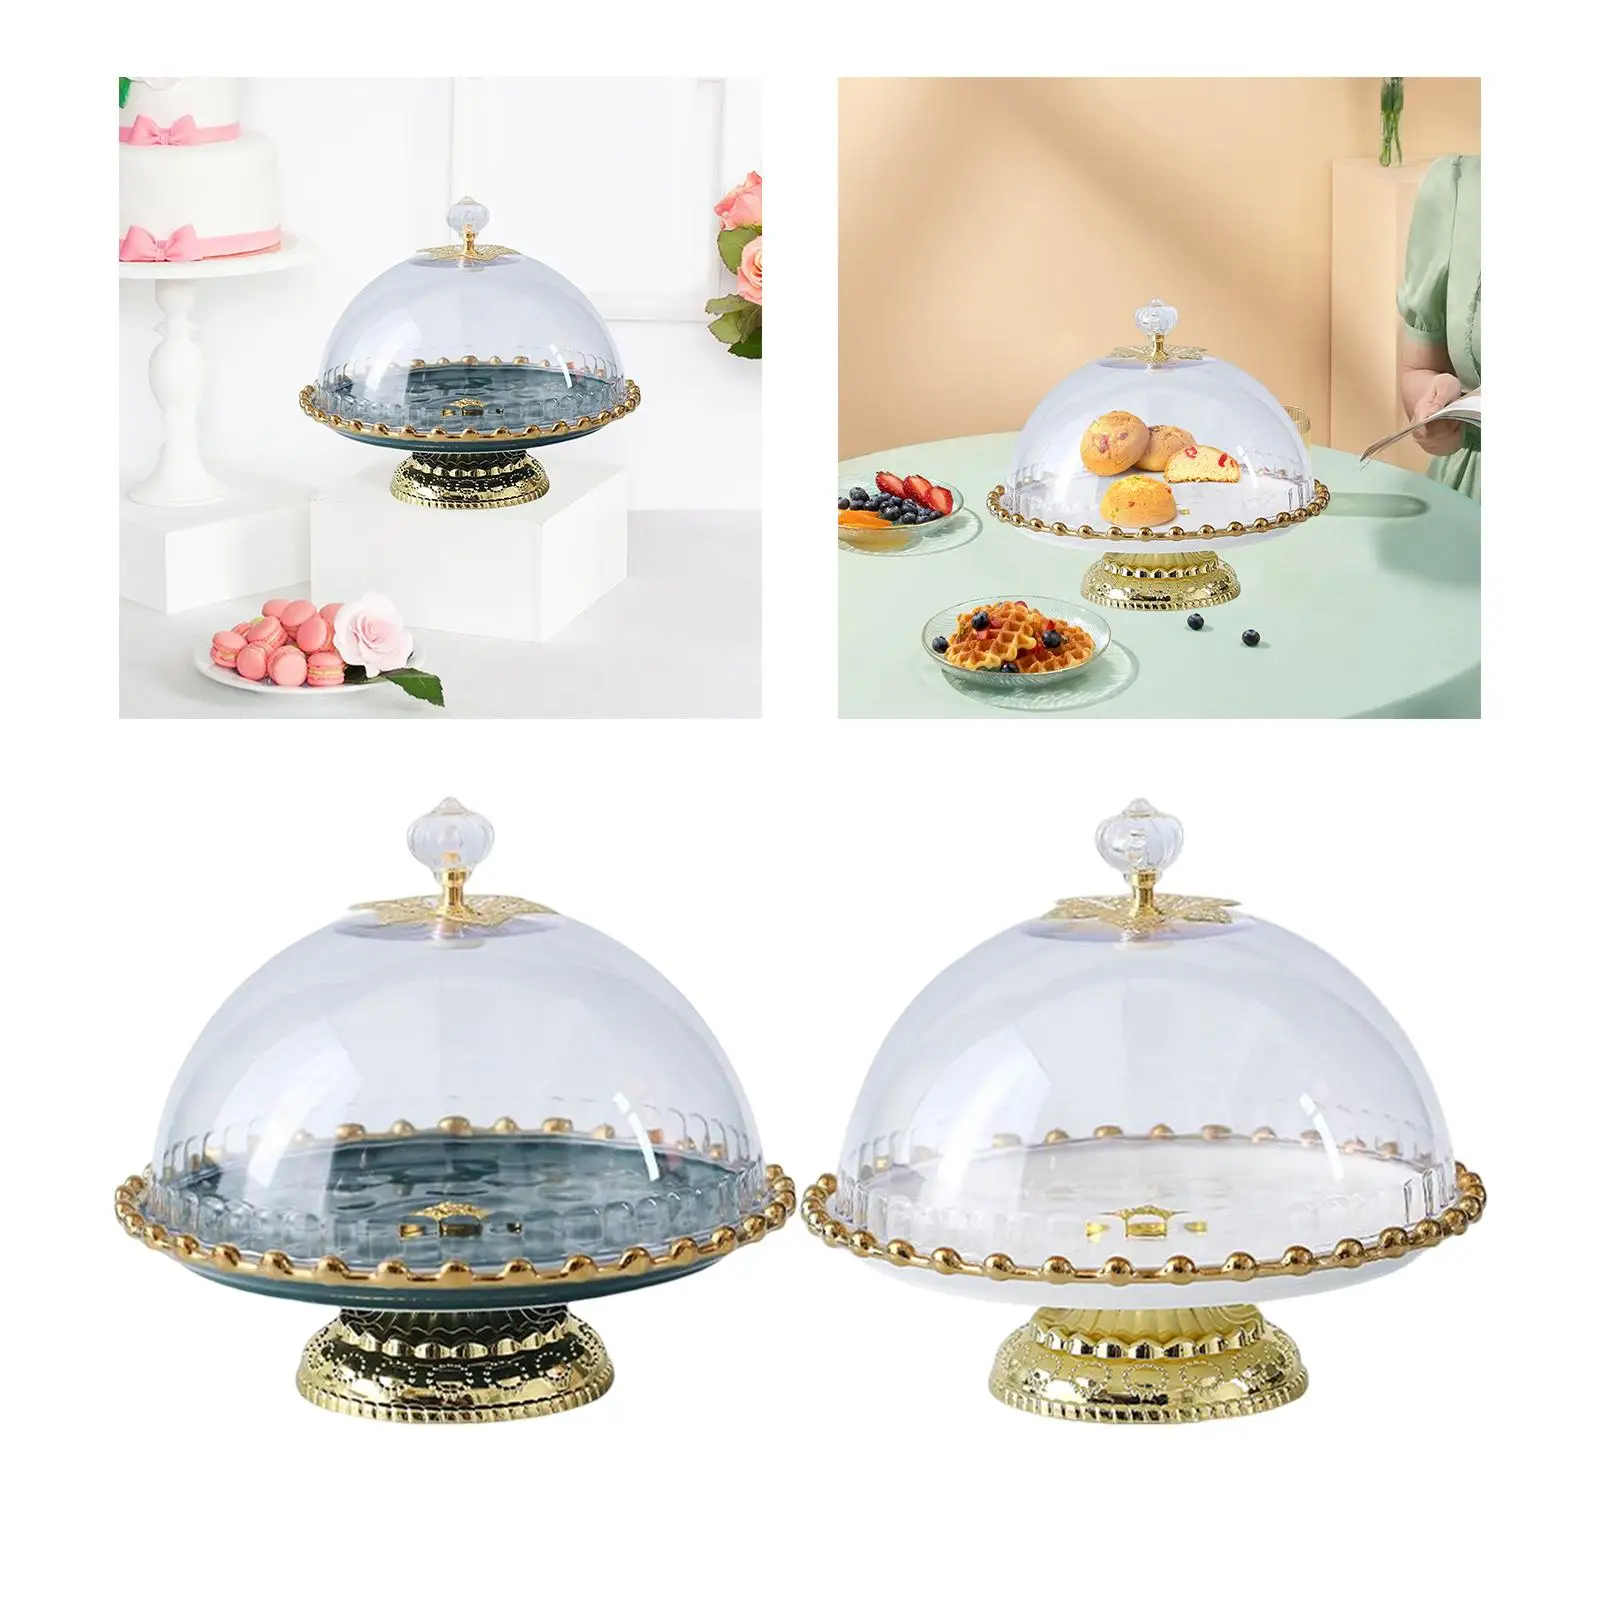 Ceramic Cake Stand Serving Platter Multifunctional for Wedding party